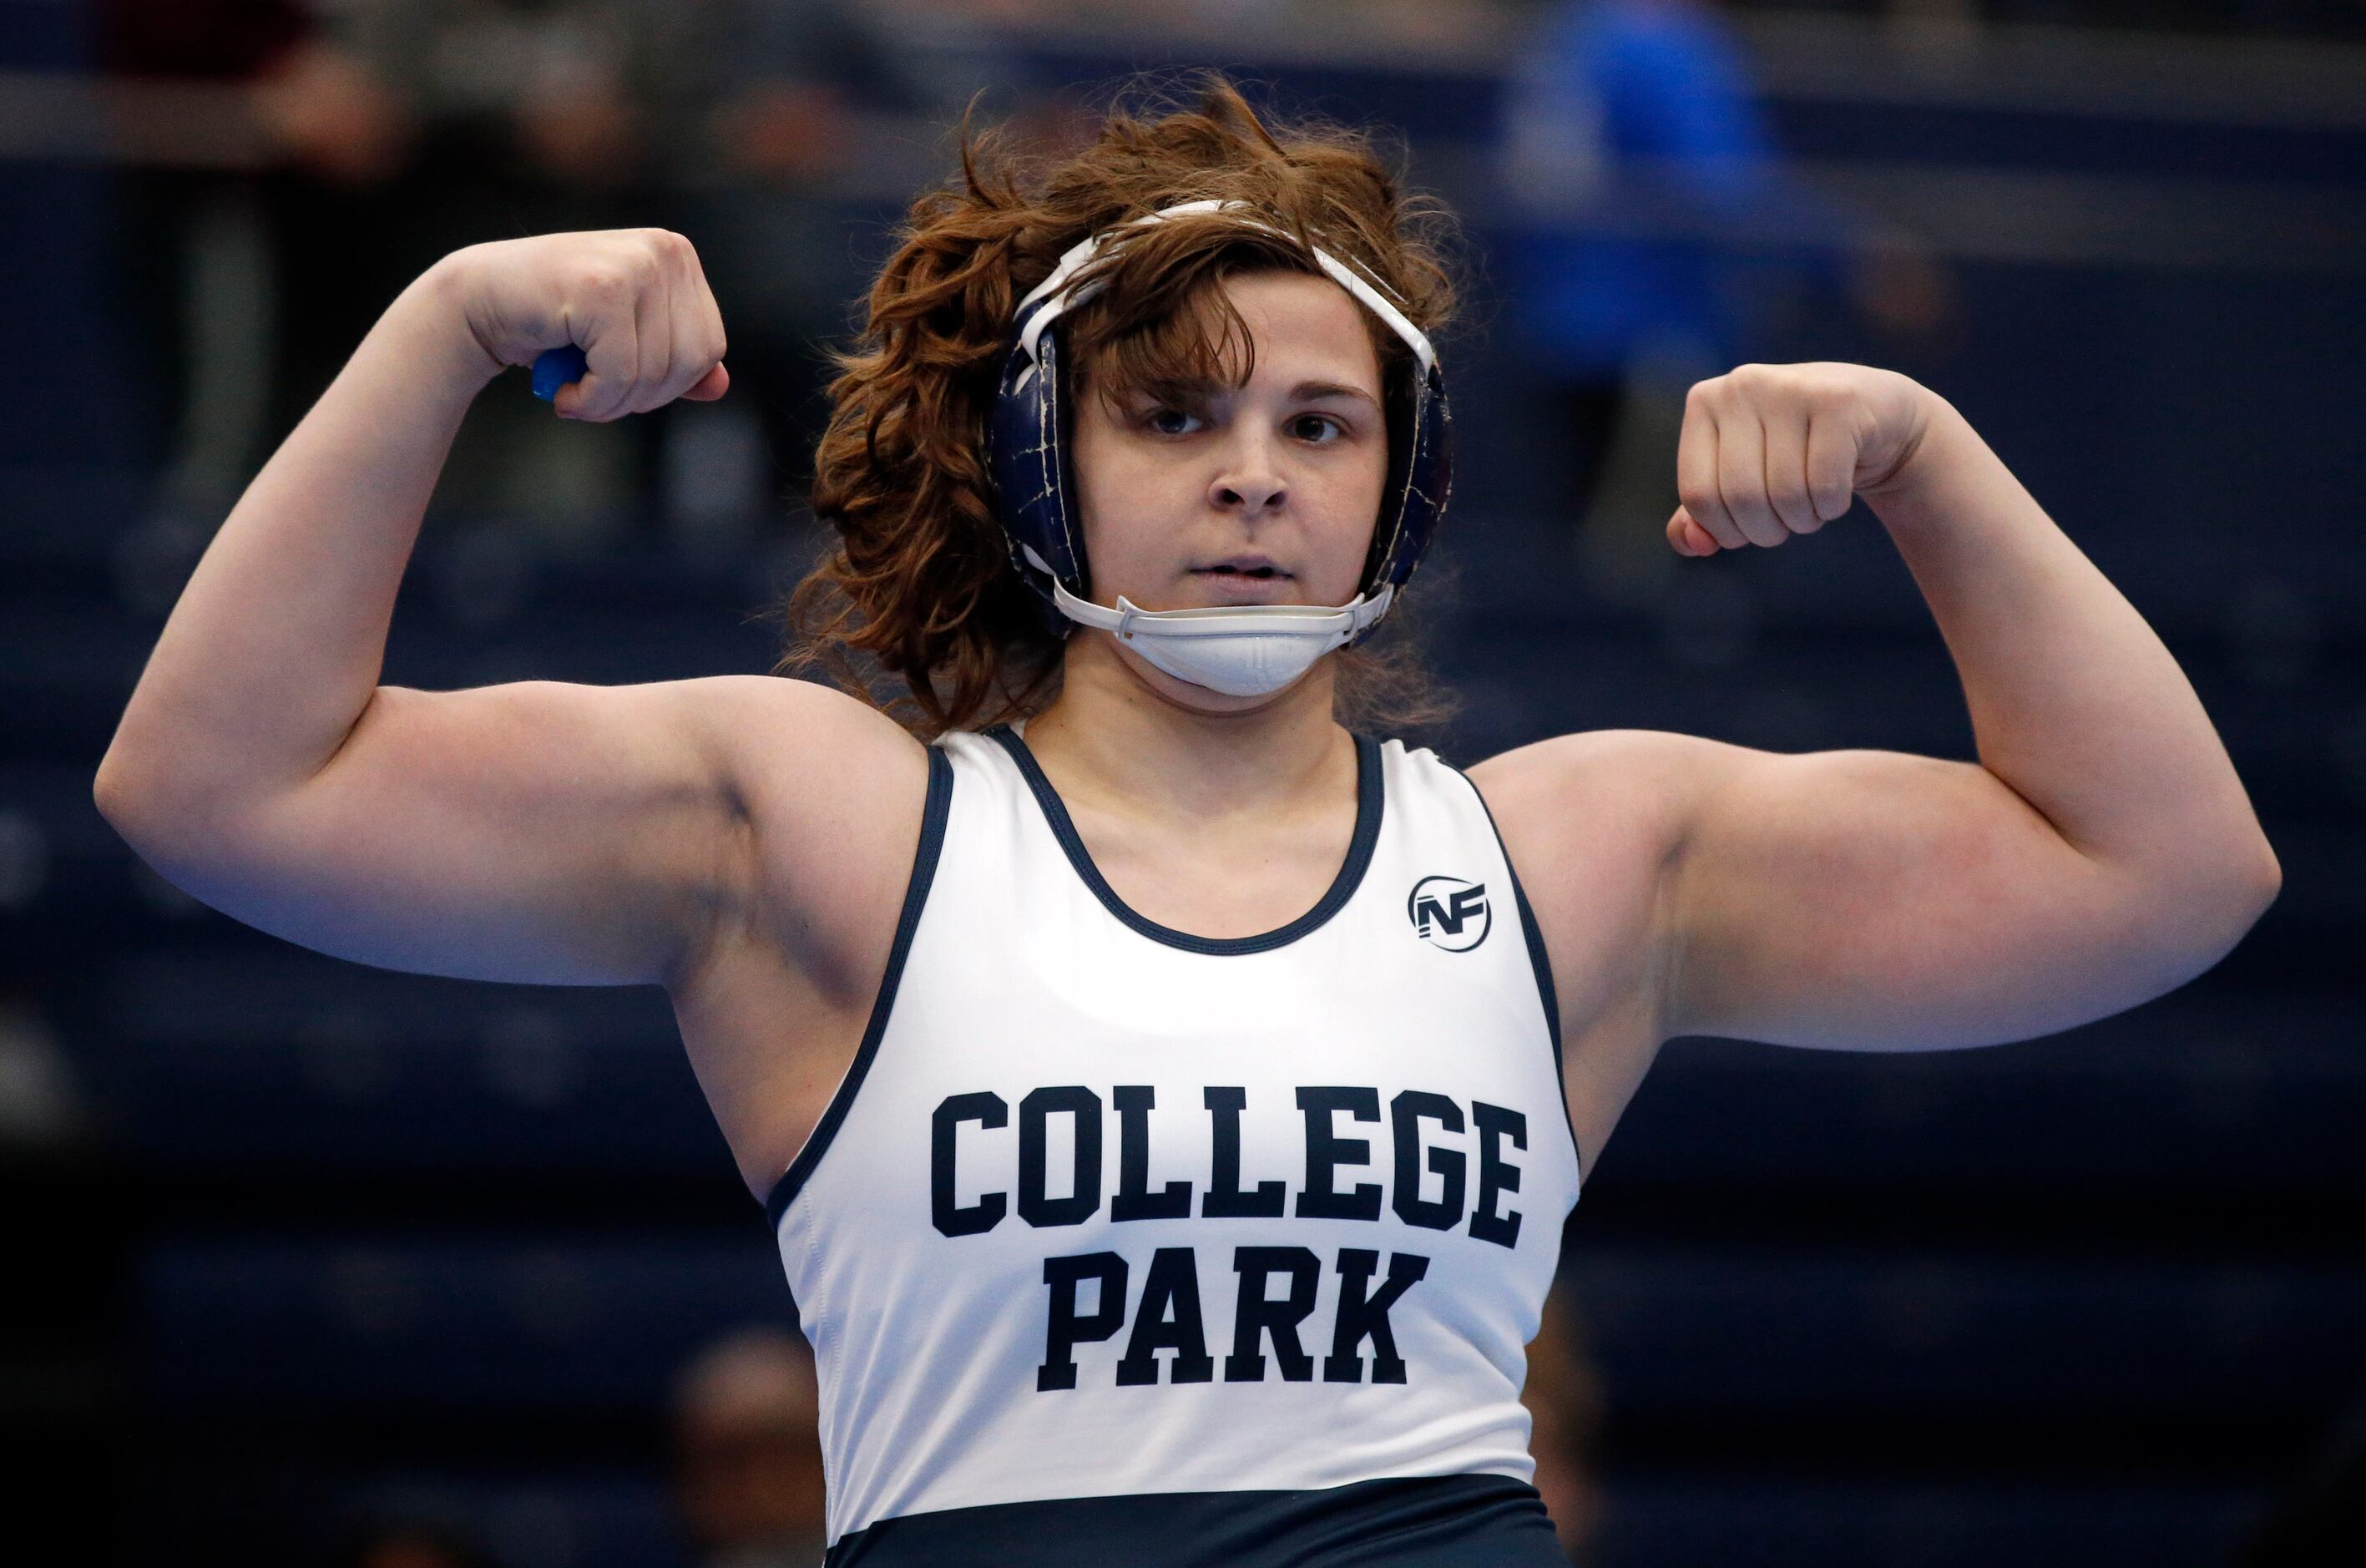 College Park High girls wrestler Brittyn Corbishley flexes her muscles after defeating...